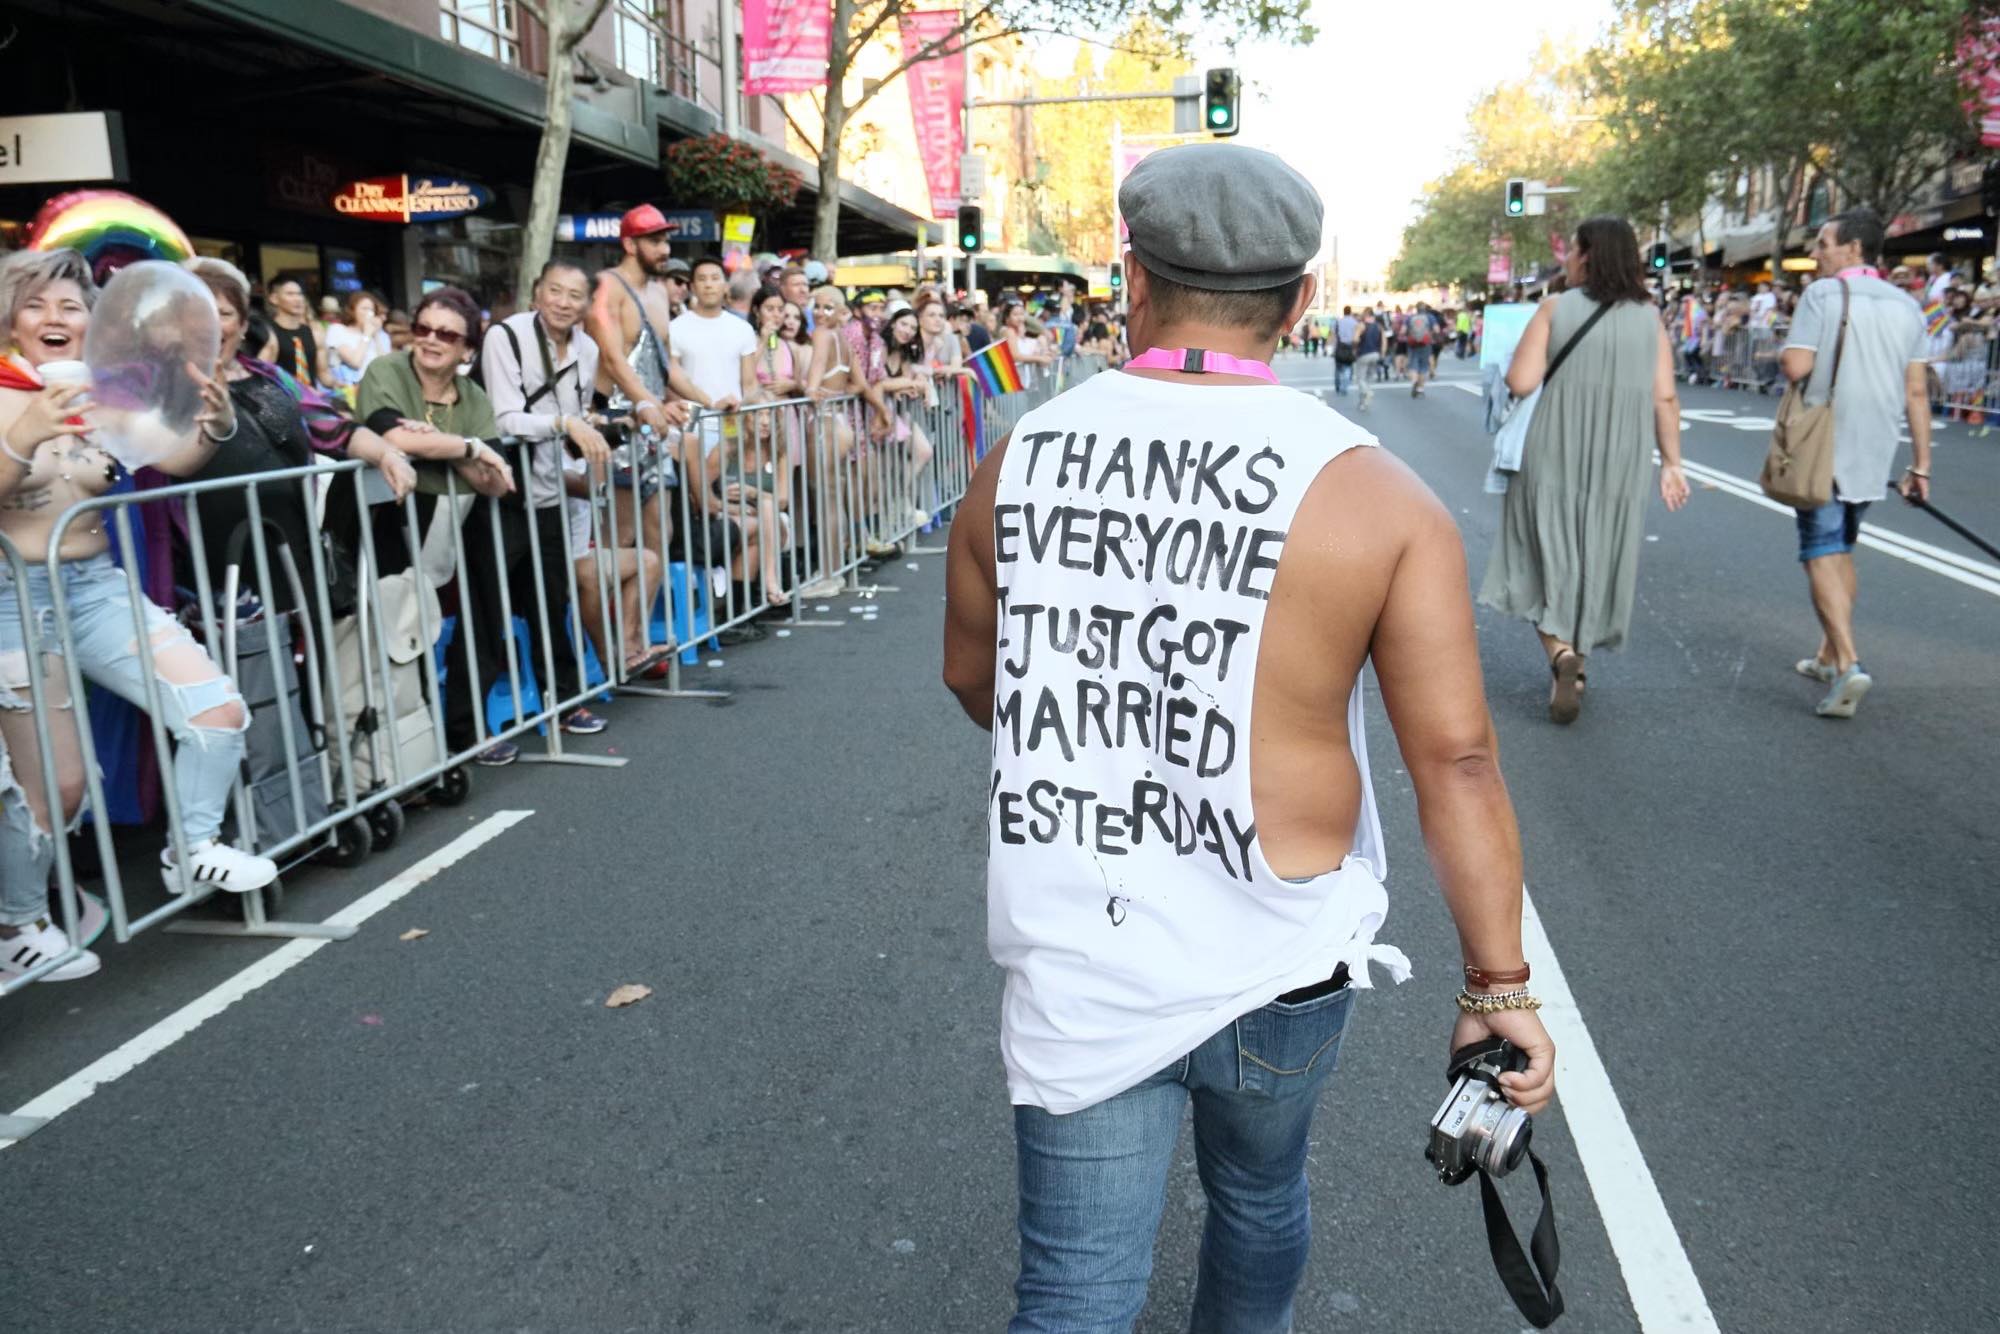 Sydney-based Japanese photographer Koichi Ogihara (Toboji) joined Mardi Gras Parade with his partner (pictured) in 2018, wearing a top with thank-you message.